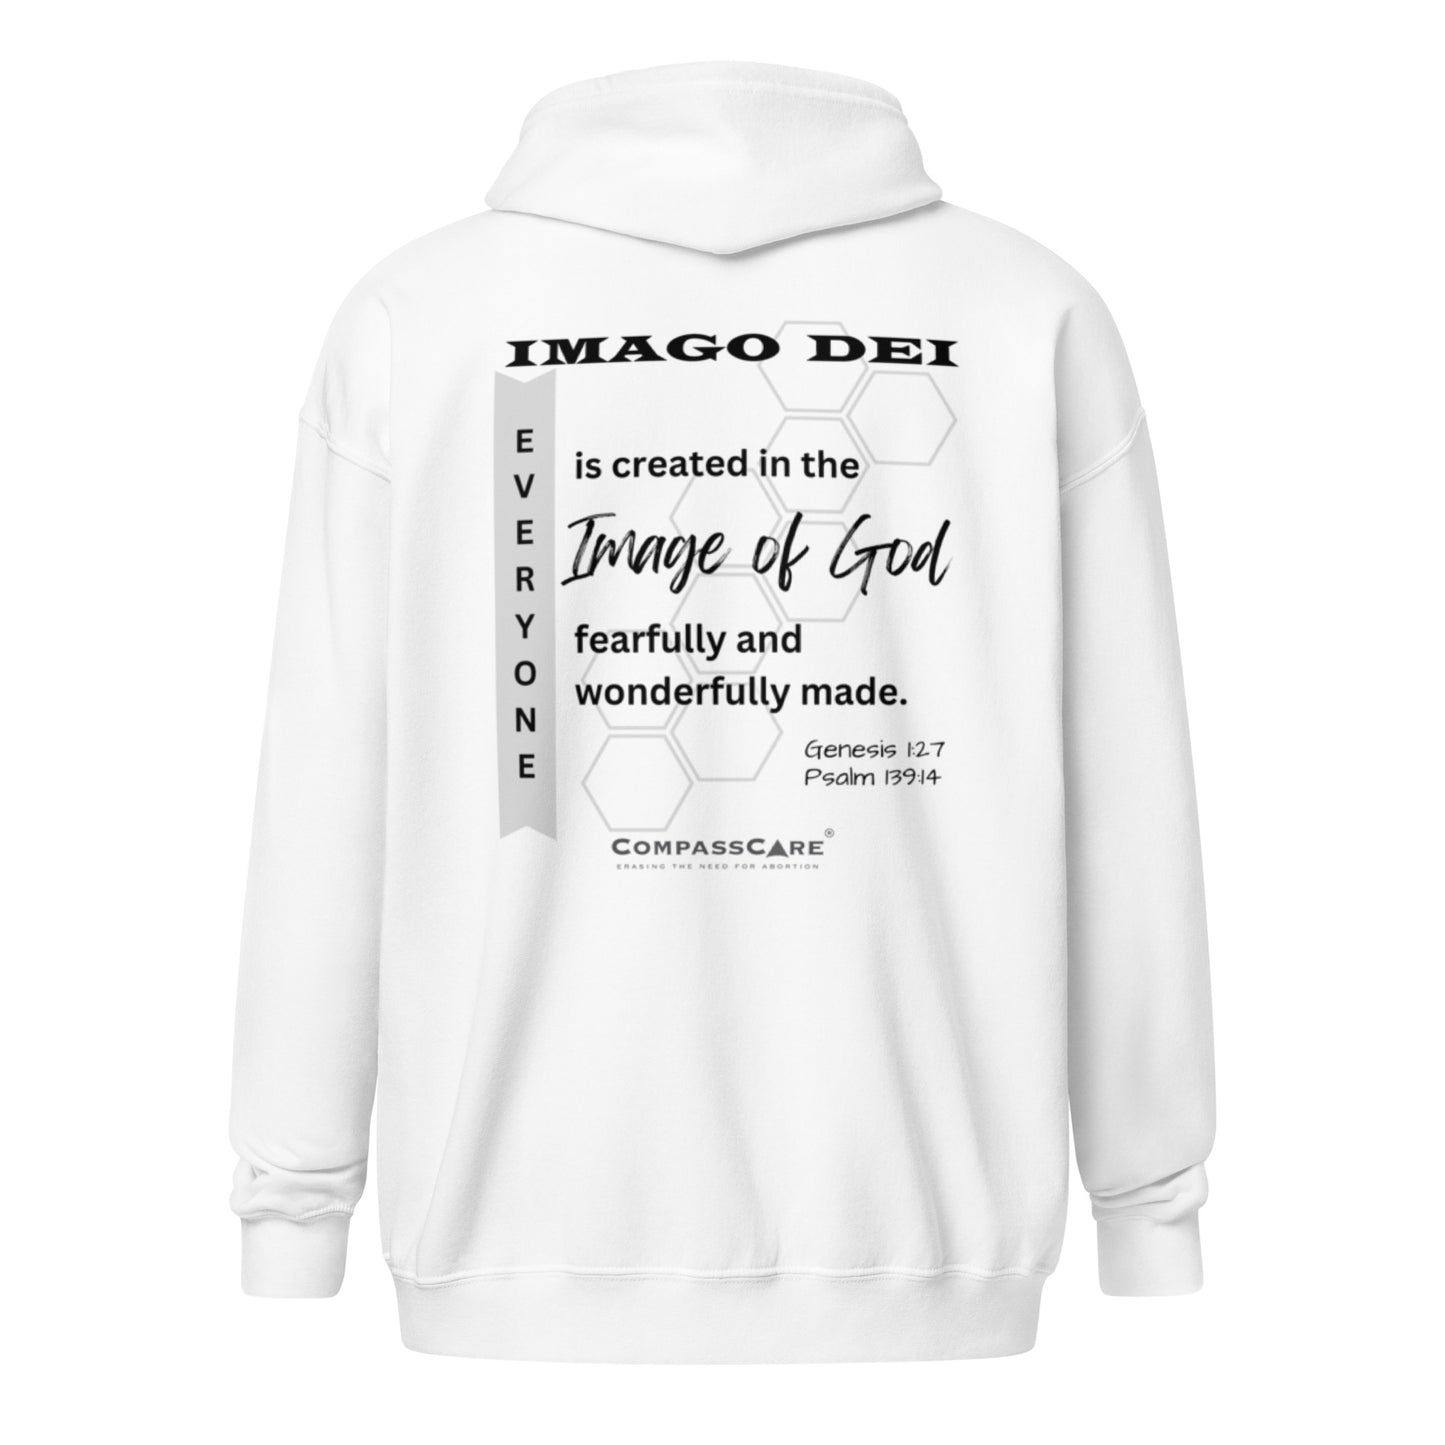 Pro-Life Zip-Up Hoodie -- Imago Dei, "Created in the Image of God."